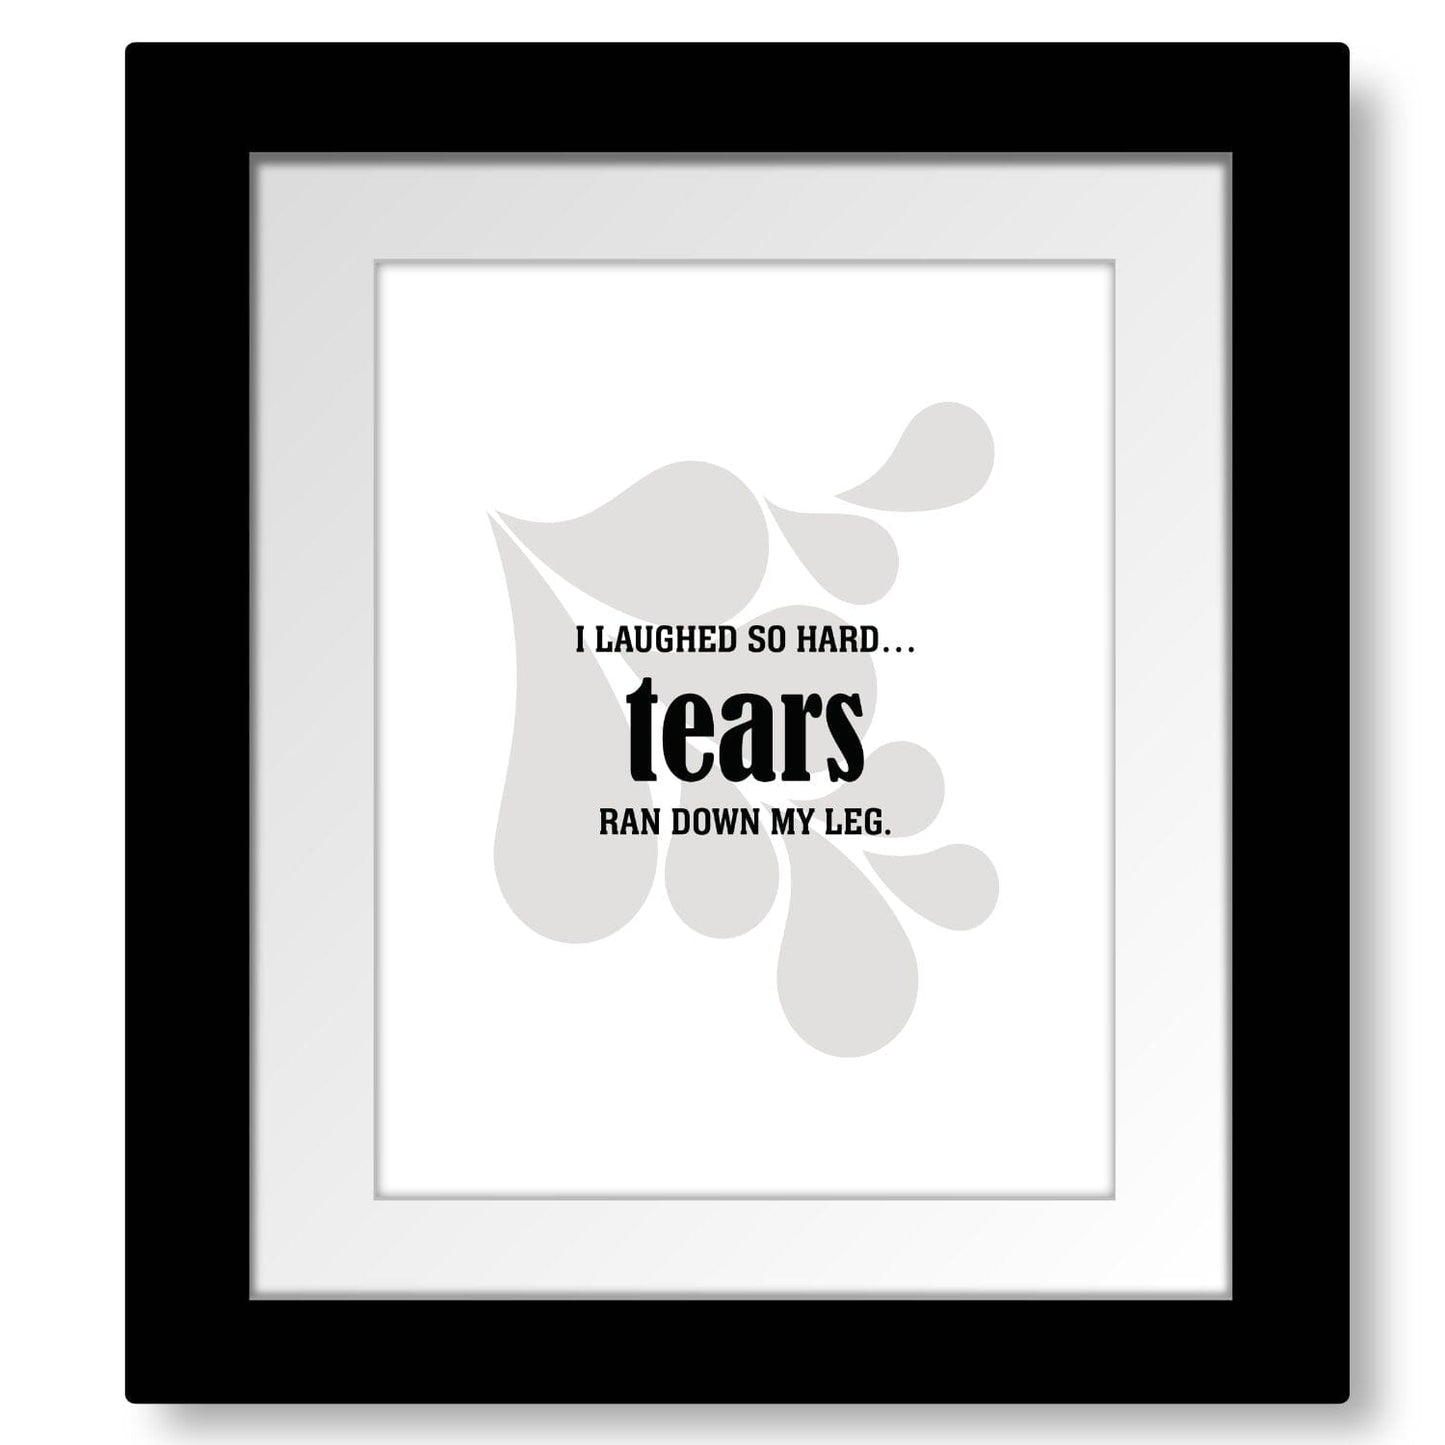 Wise and Witty Art - I Laughed So Hard Tears Ran Down My Leg Wise and Wiseass Quotes Song Lyrics Art 8x10 Framed and Matted Print 